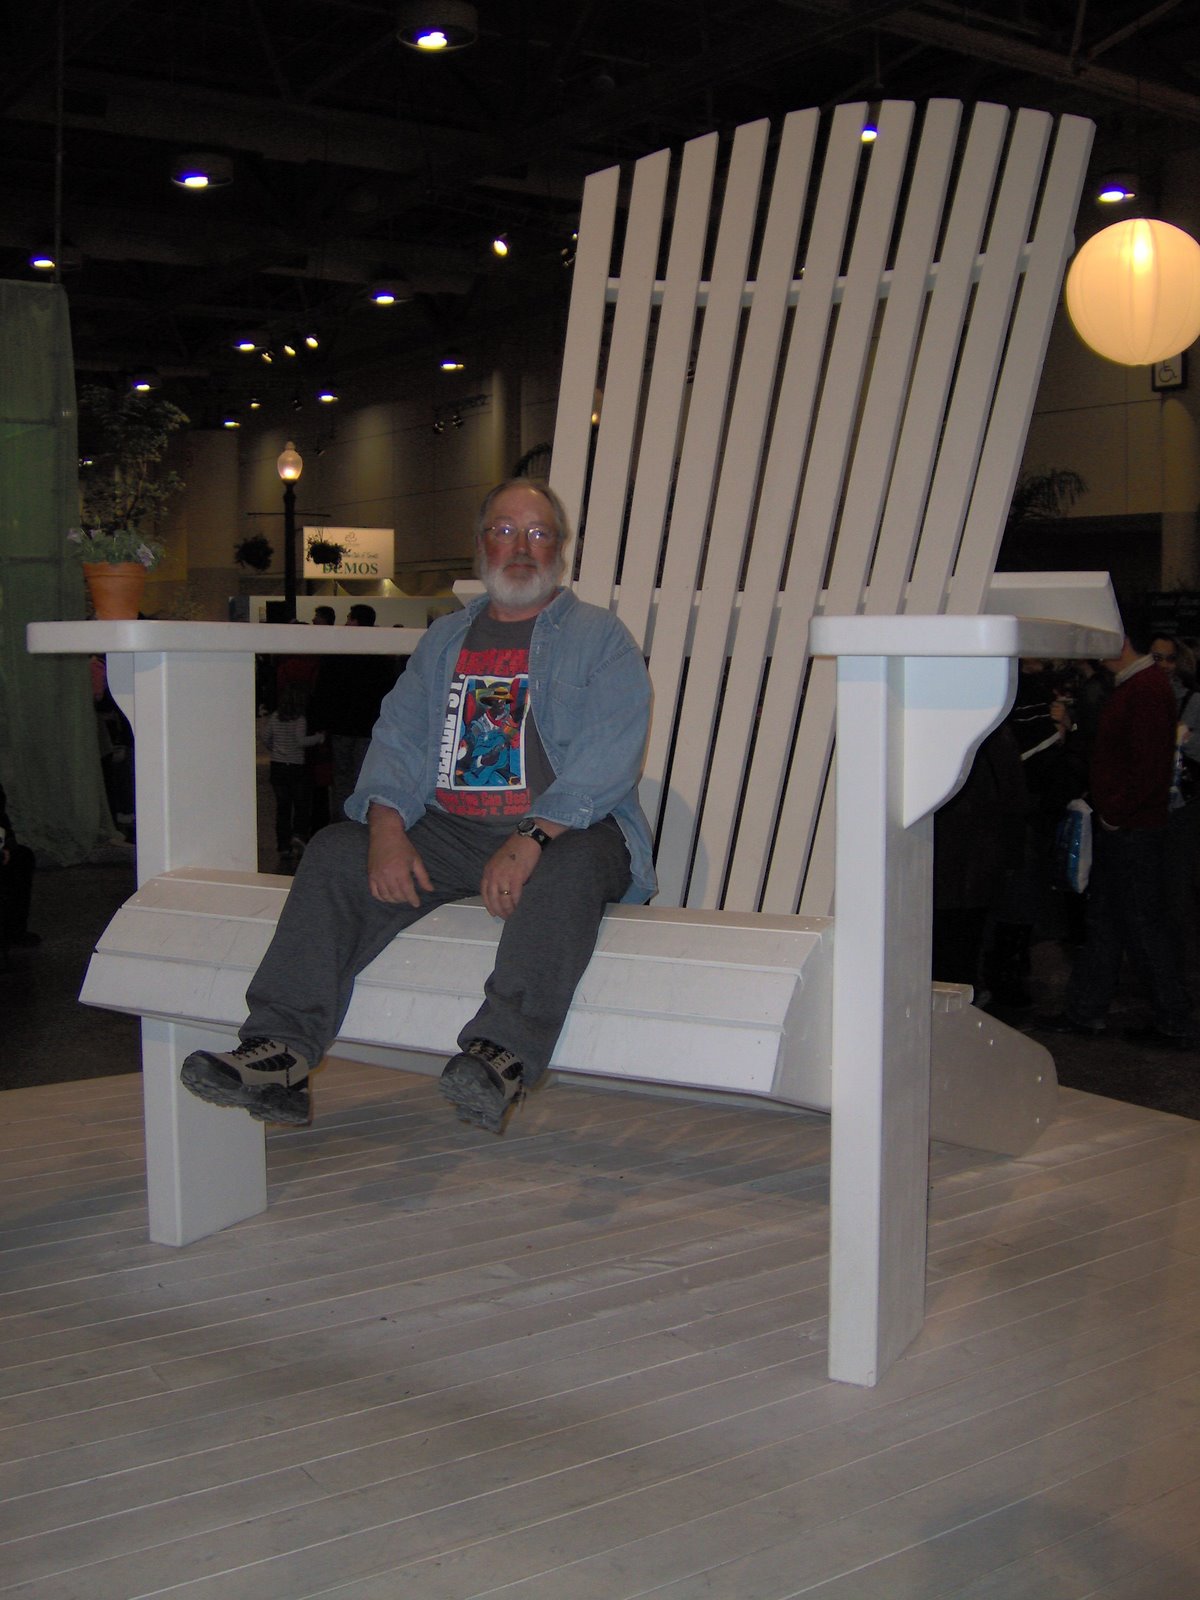 [Dave+in+a+big+chair.JPG]